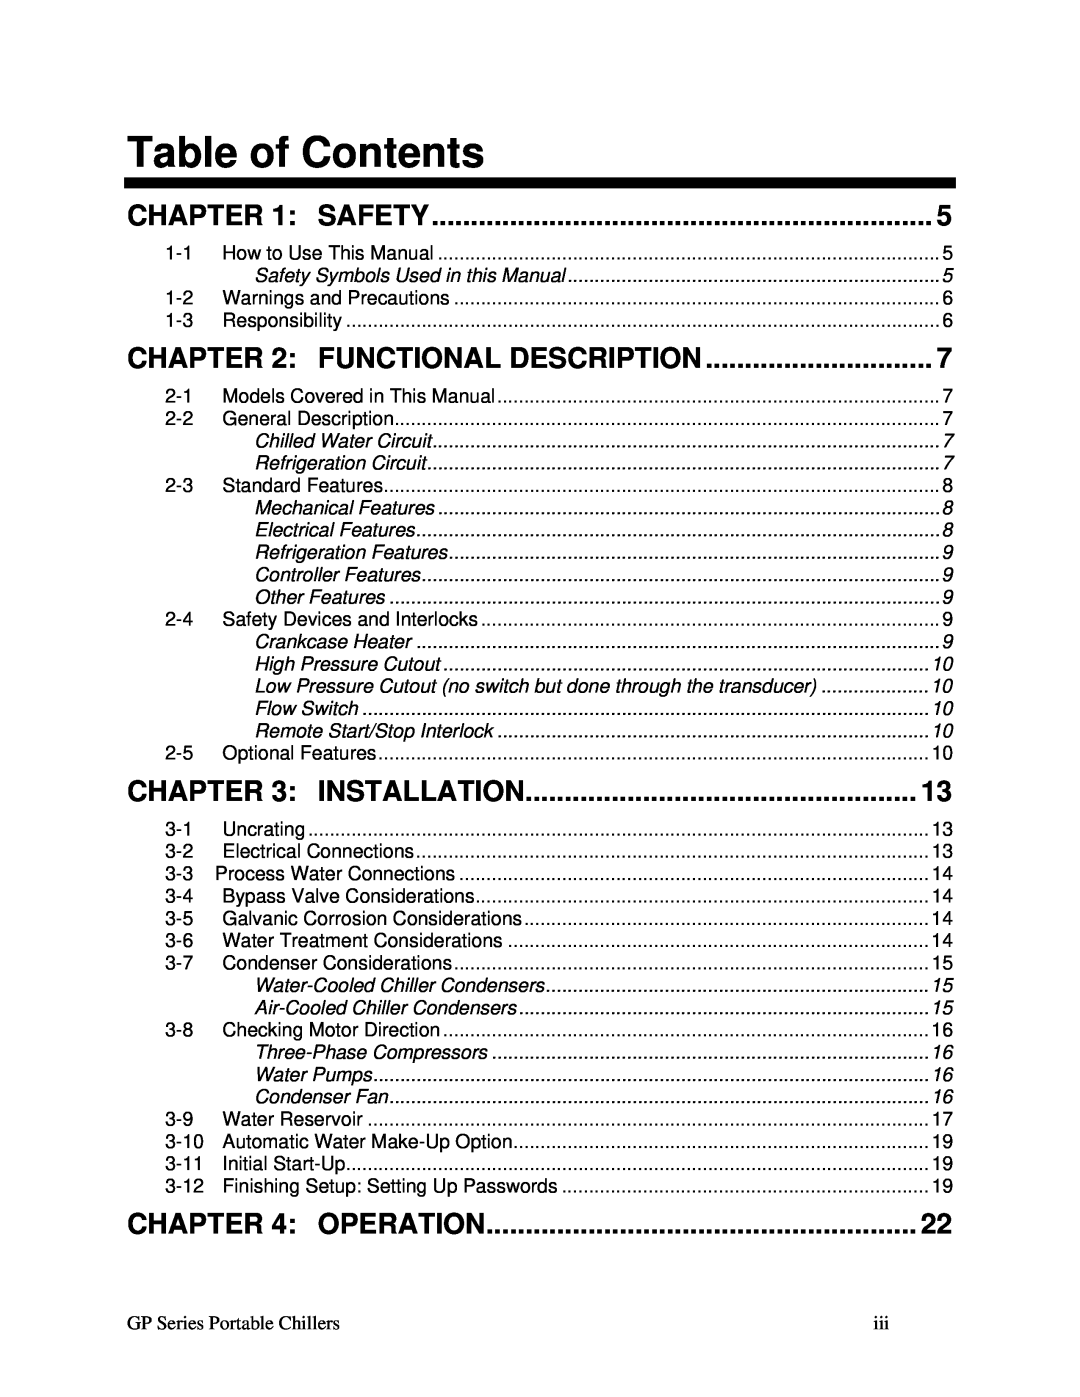 Sterling GP Series specifications Table of Contents, Safety, Functional Description, Installation, Operation 